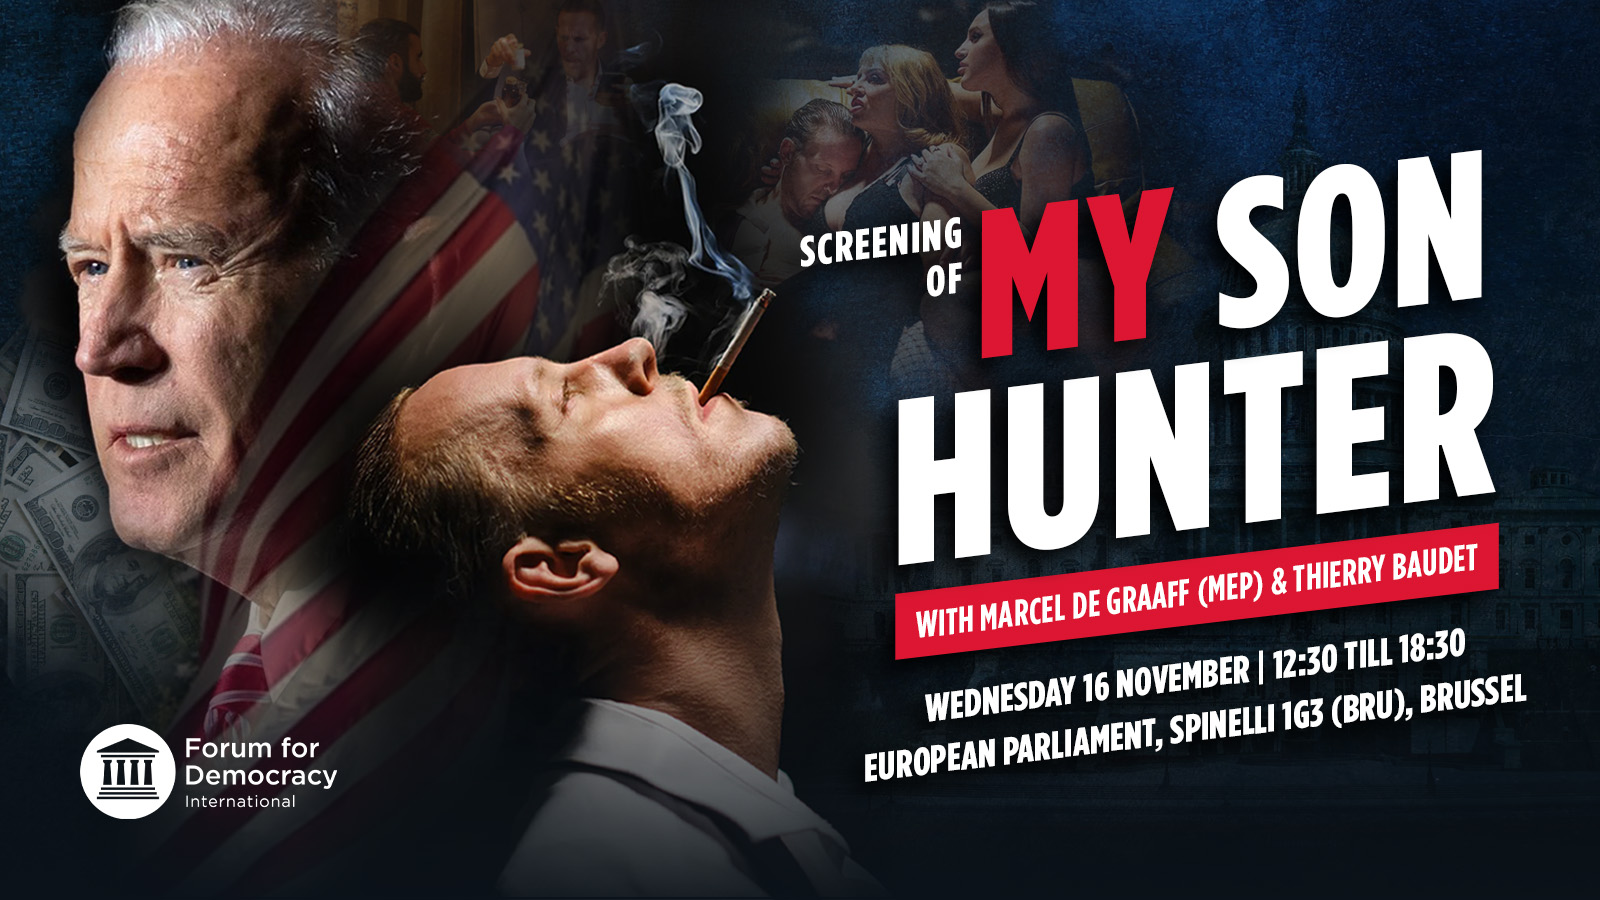 Screening of 'My Son Hunter' in the European Parliament